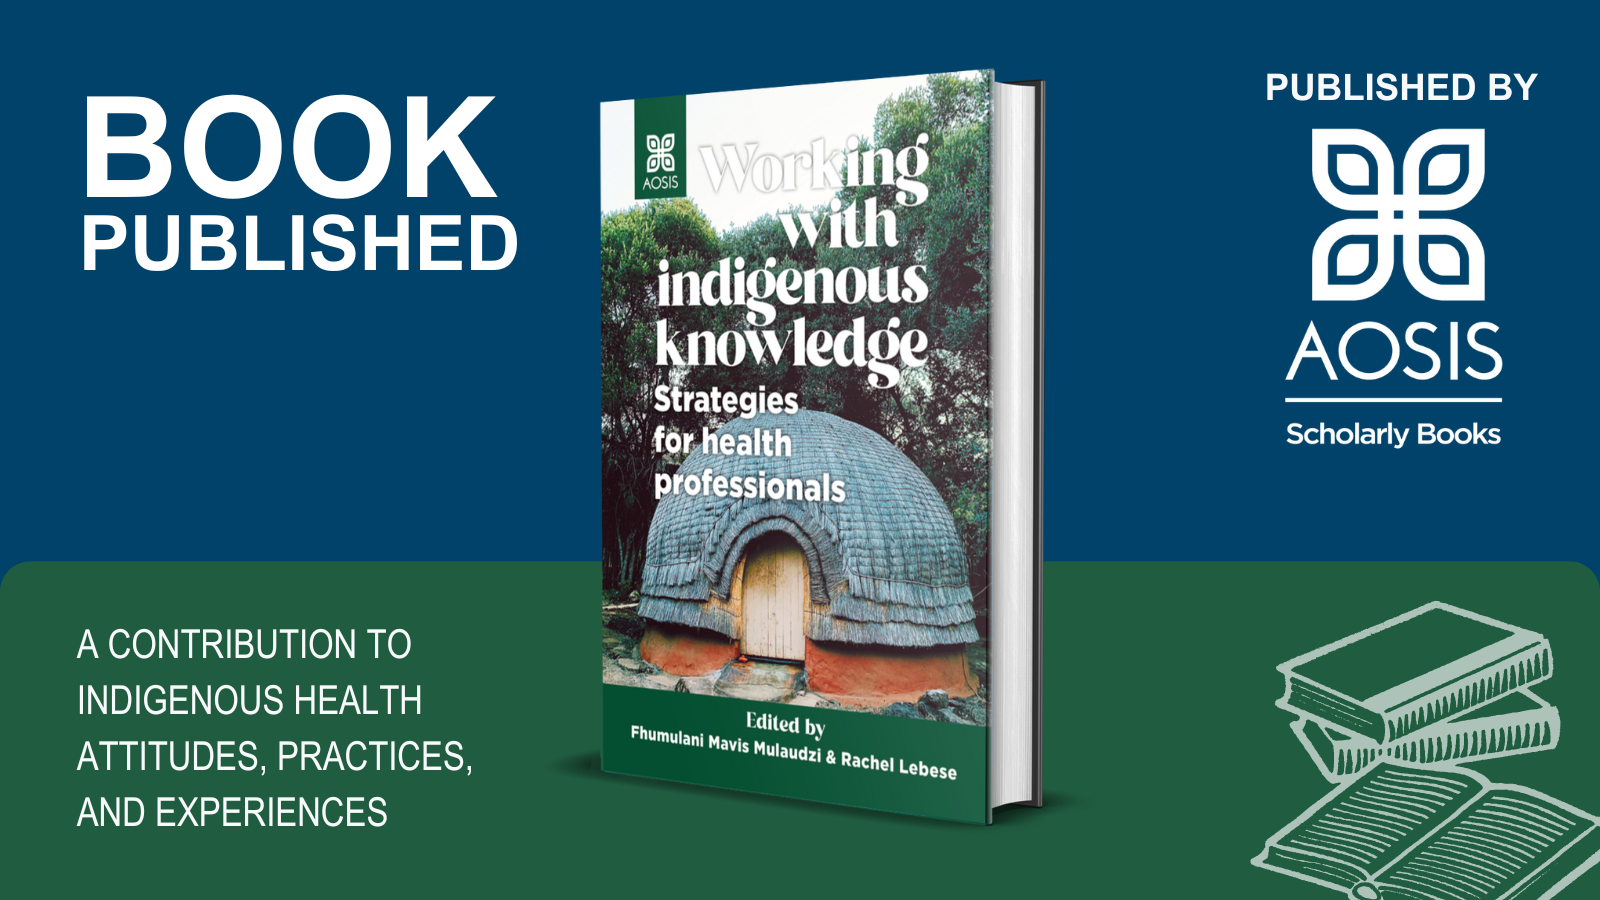 AOSIS Books publishes ‘Working with indigenous knowledge’